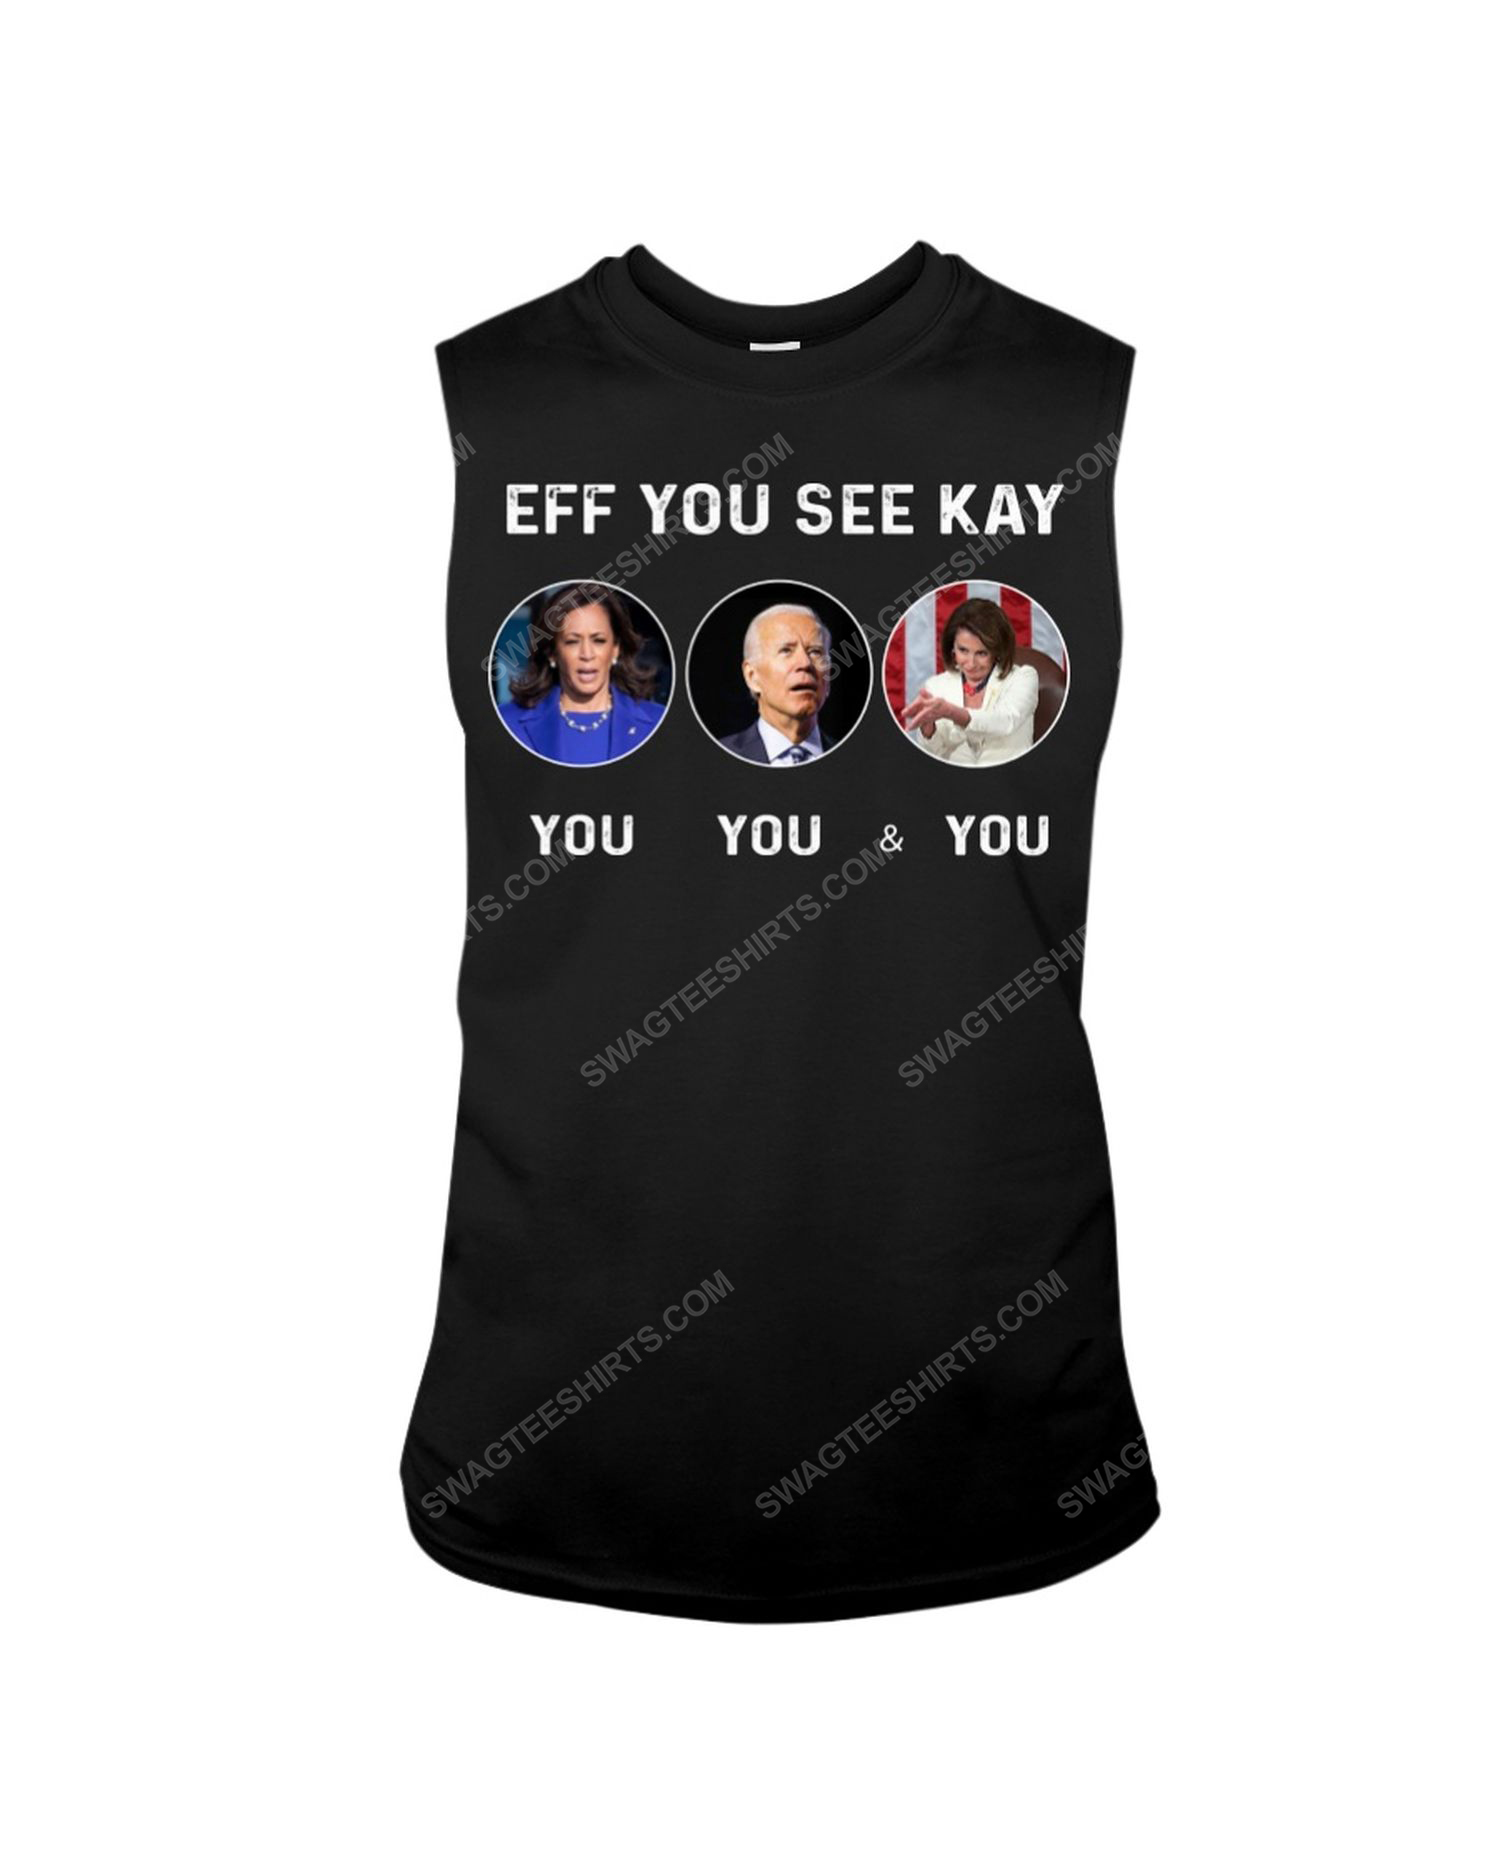 EFF you see kay political tank top